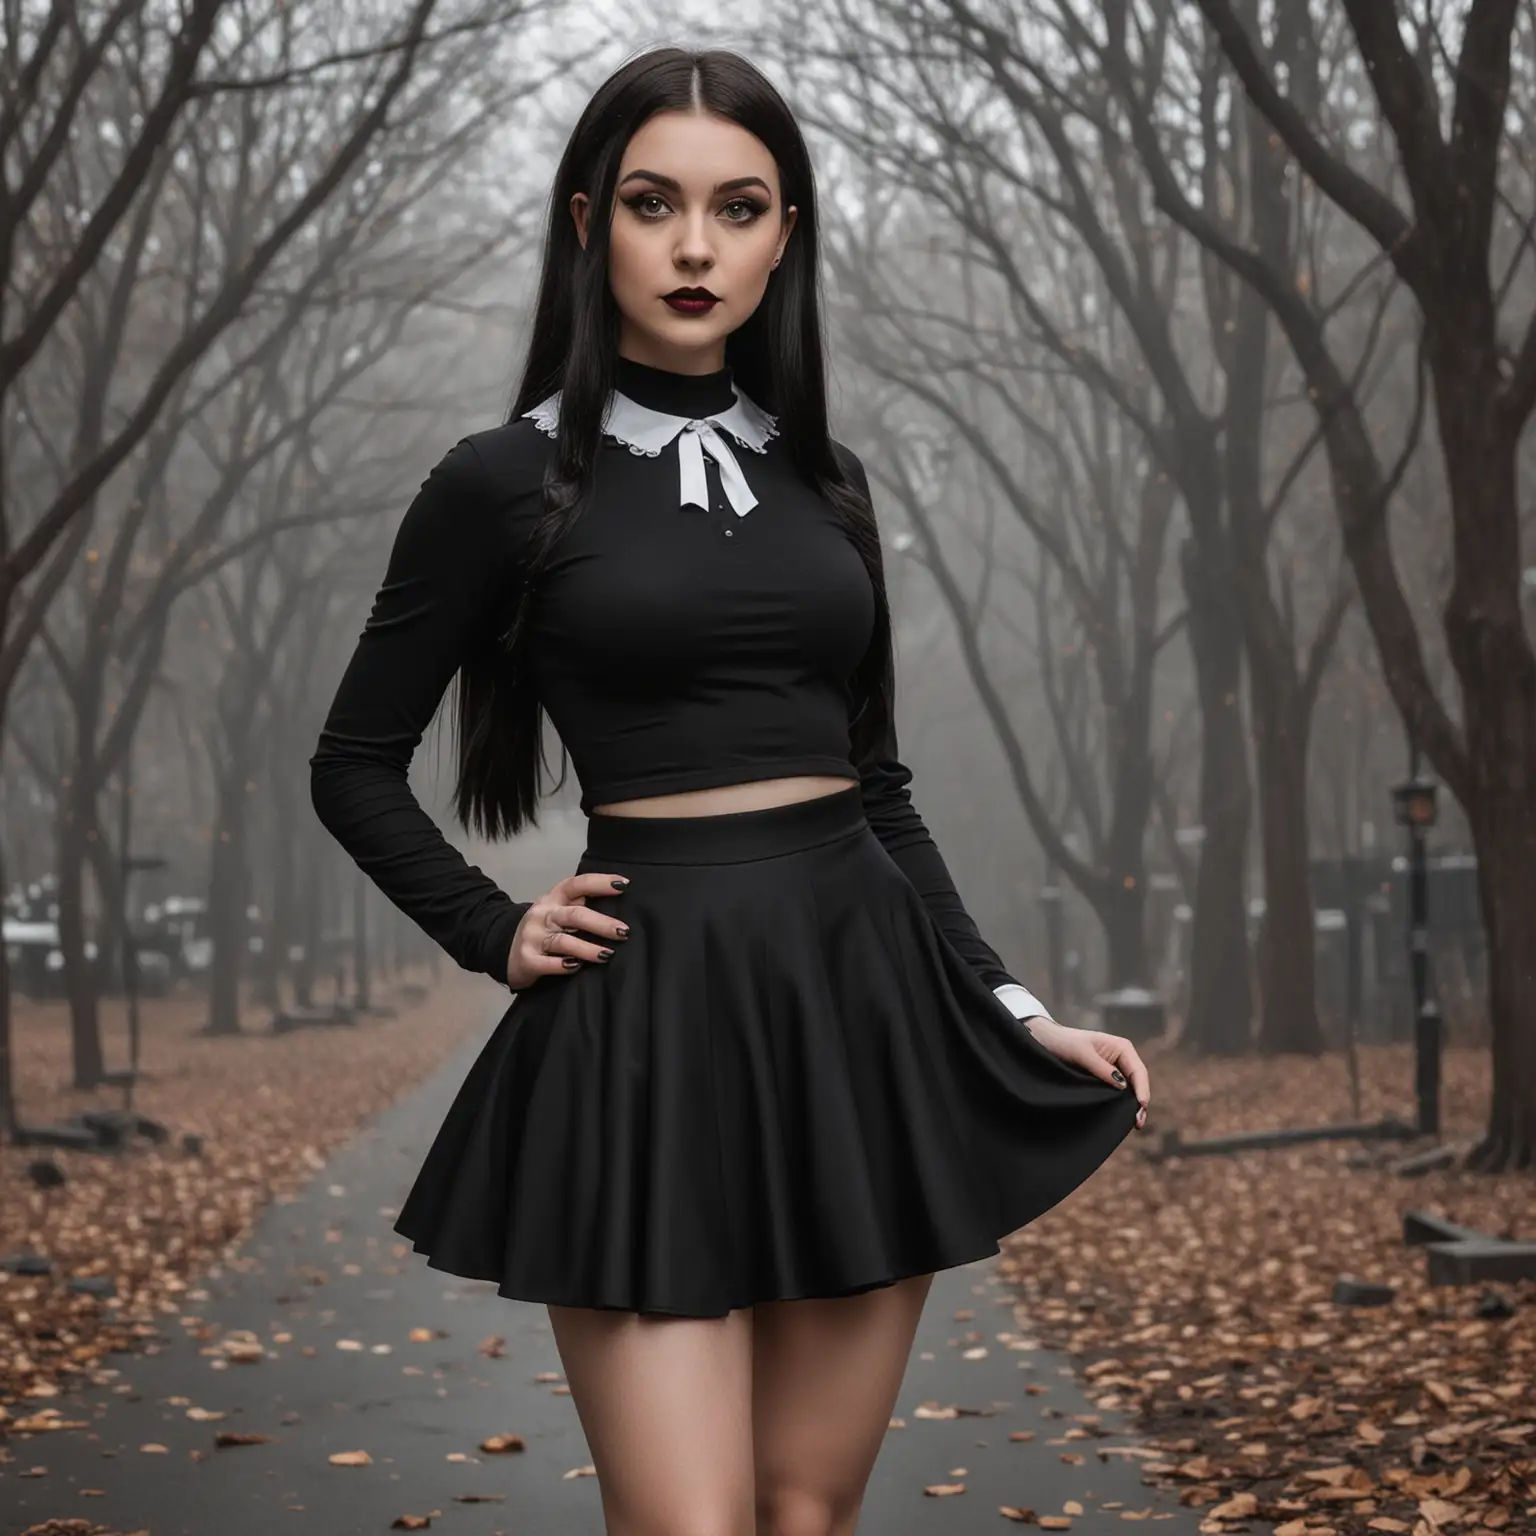 a mockup for a black skater skirt.  the model should be female and resemble wednesday addams.  the background of the photo should resemble nevermore academy